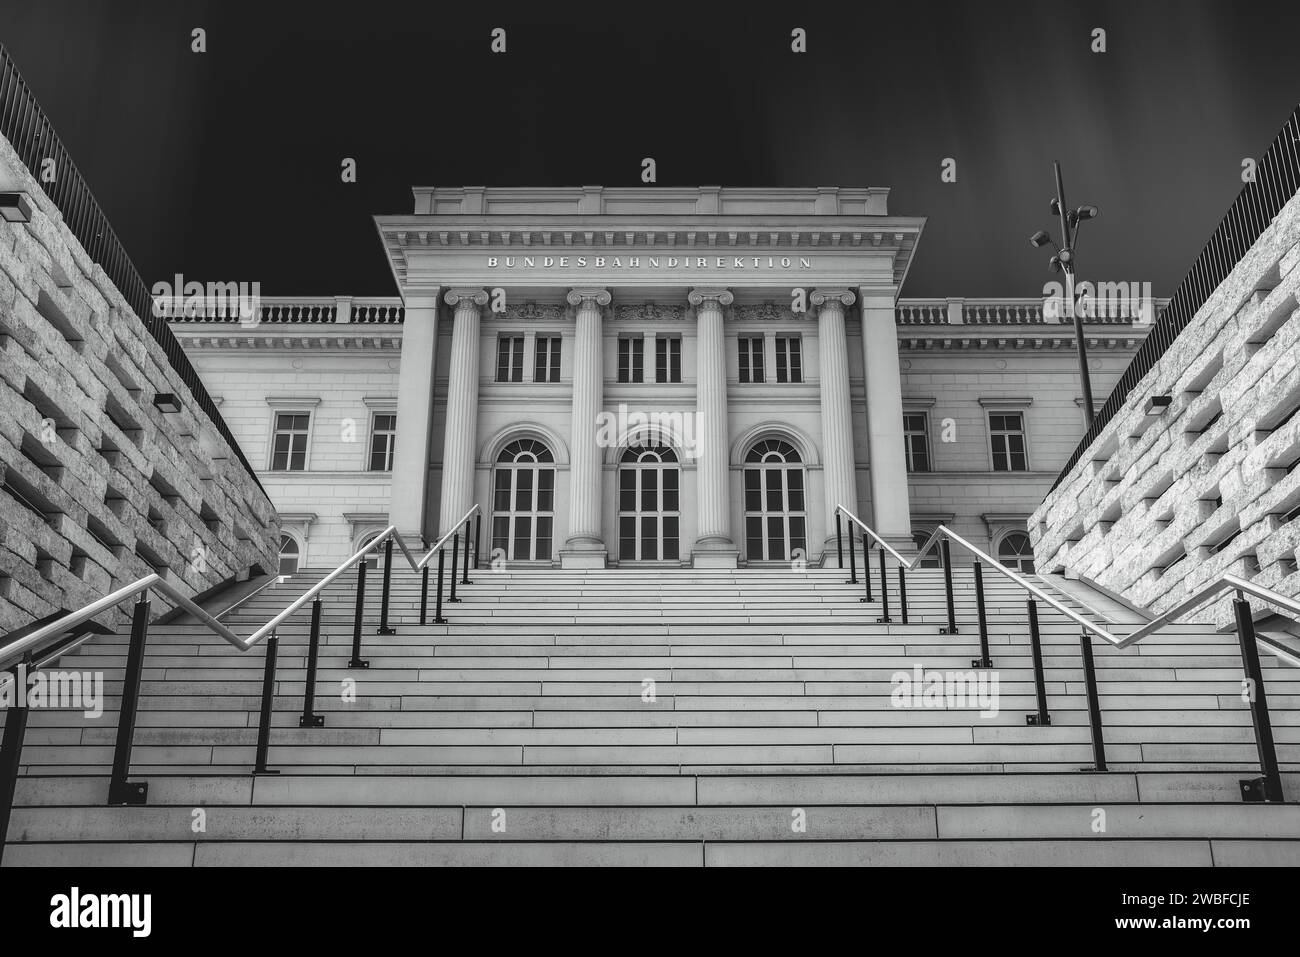 Monochrome image of a historic building with columns and staircase, Federal Railway Headquarters, Wuppertal Elberfeld, North Rhine-Westphalia, Germany Stock Photo